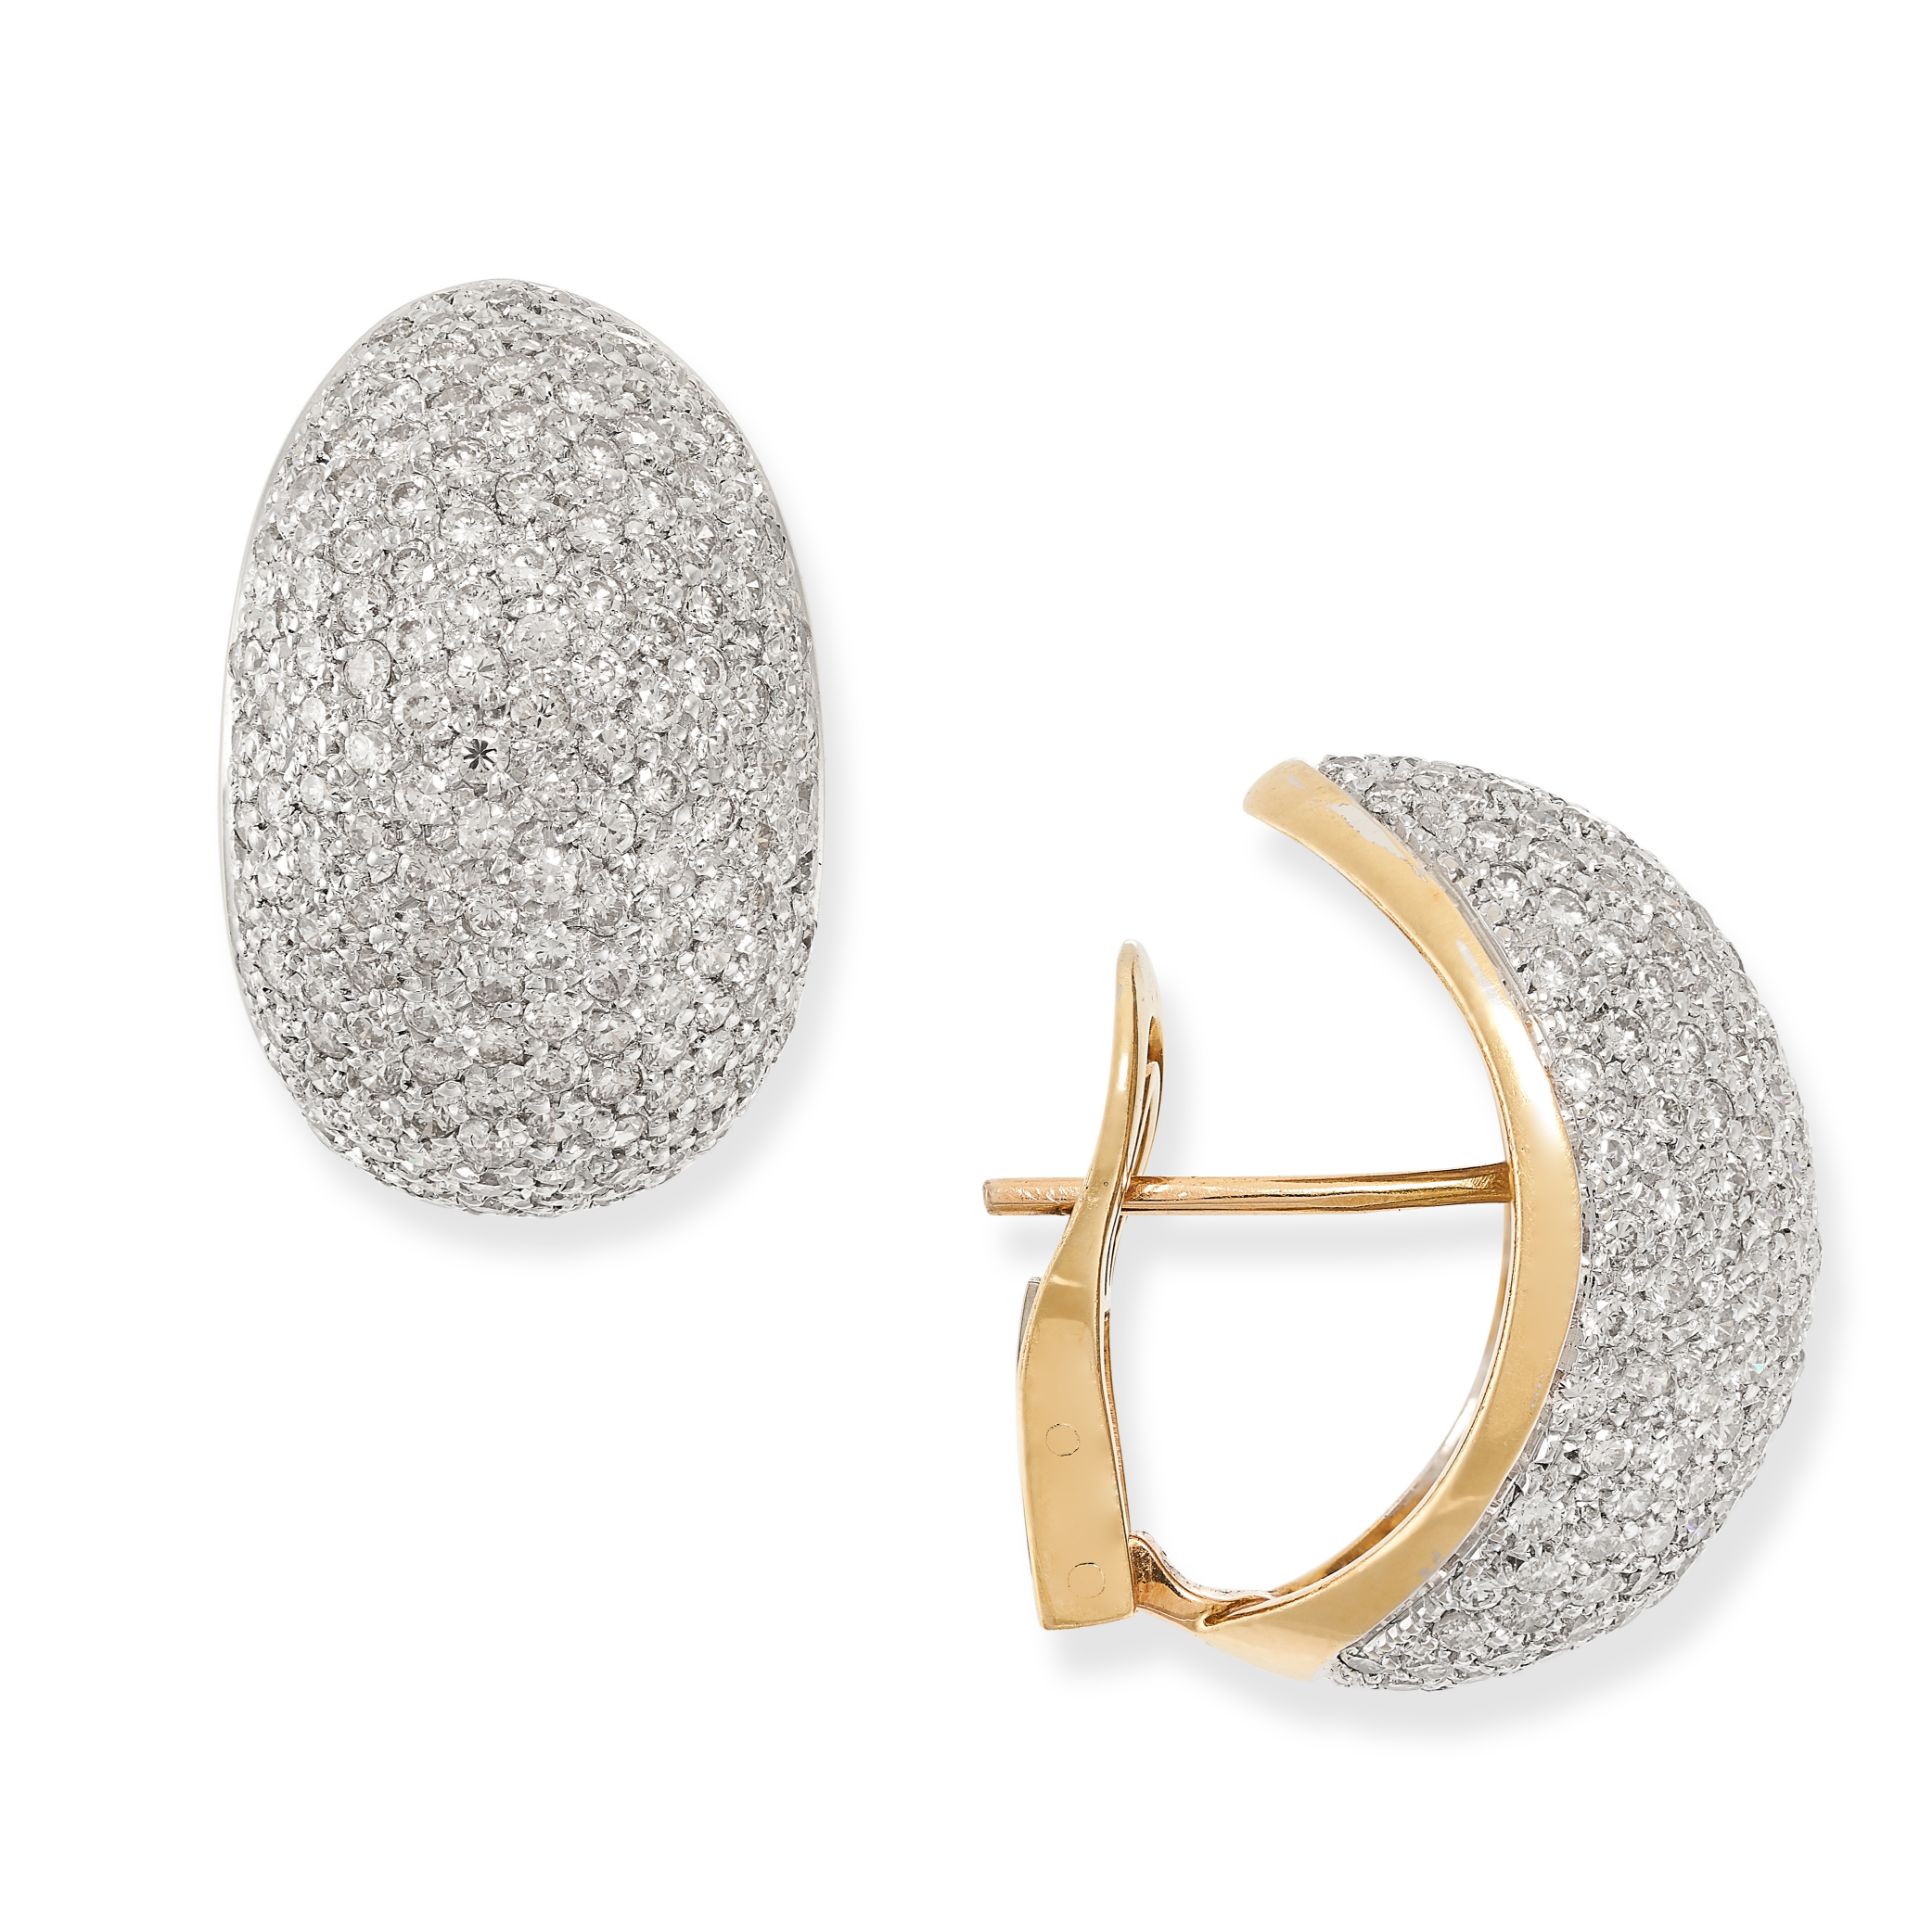 A PAIR OF DIAMOND HOOP EARRINGS in yellow gold and white gold, pave set with round brilliant cut - Image 2 of 2